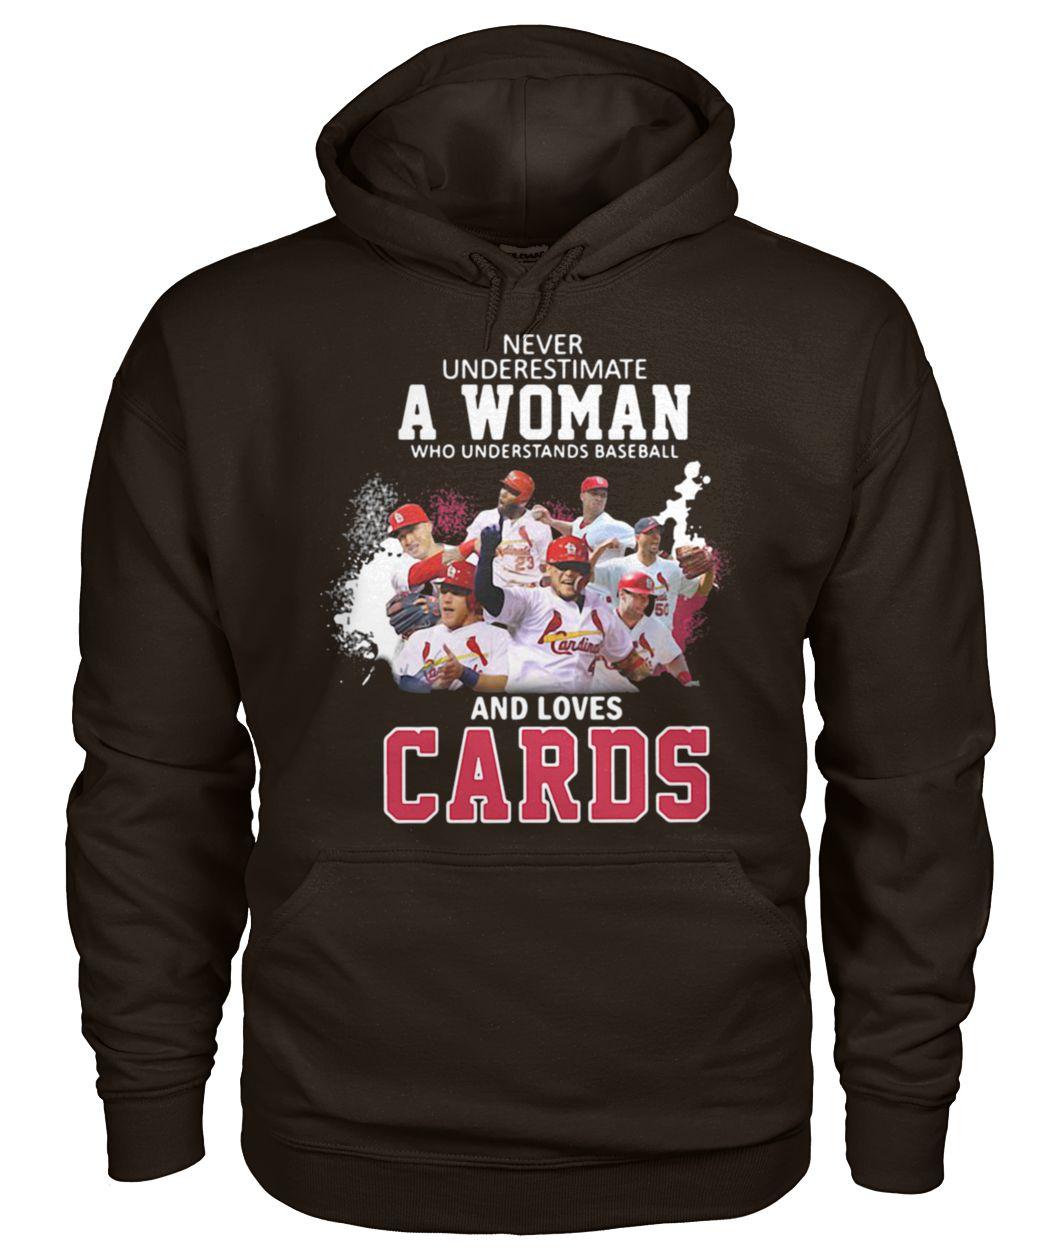 Never underestimate a woman who understands baseball and loves st louis cardinals hoodie